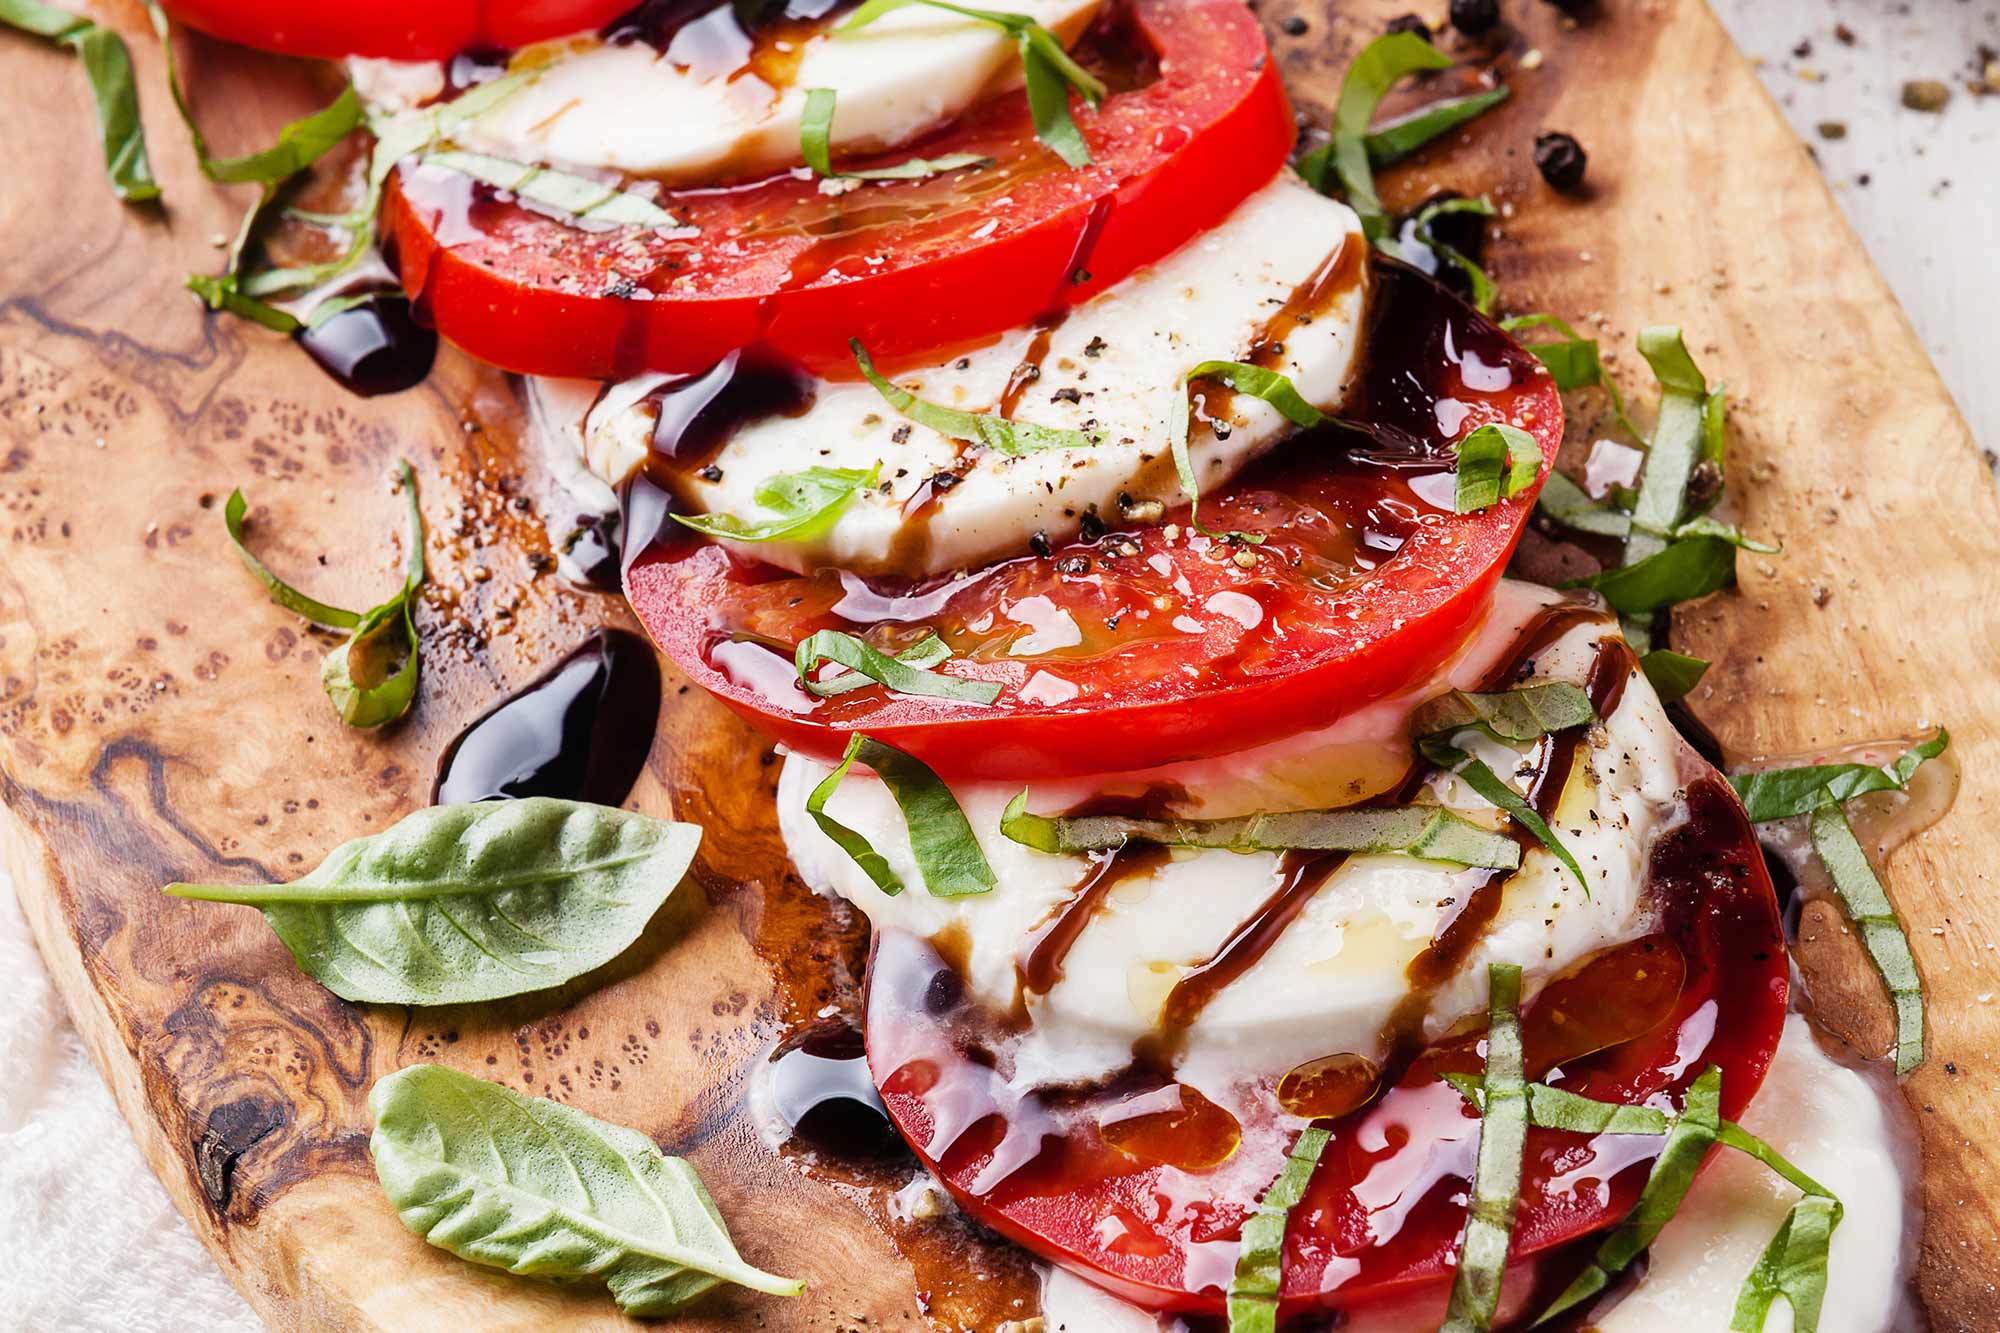 Caprese Salad with Honey-Balsamic Reduction